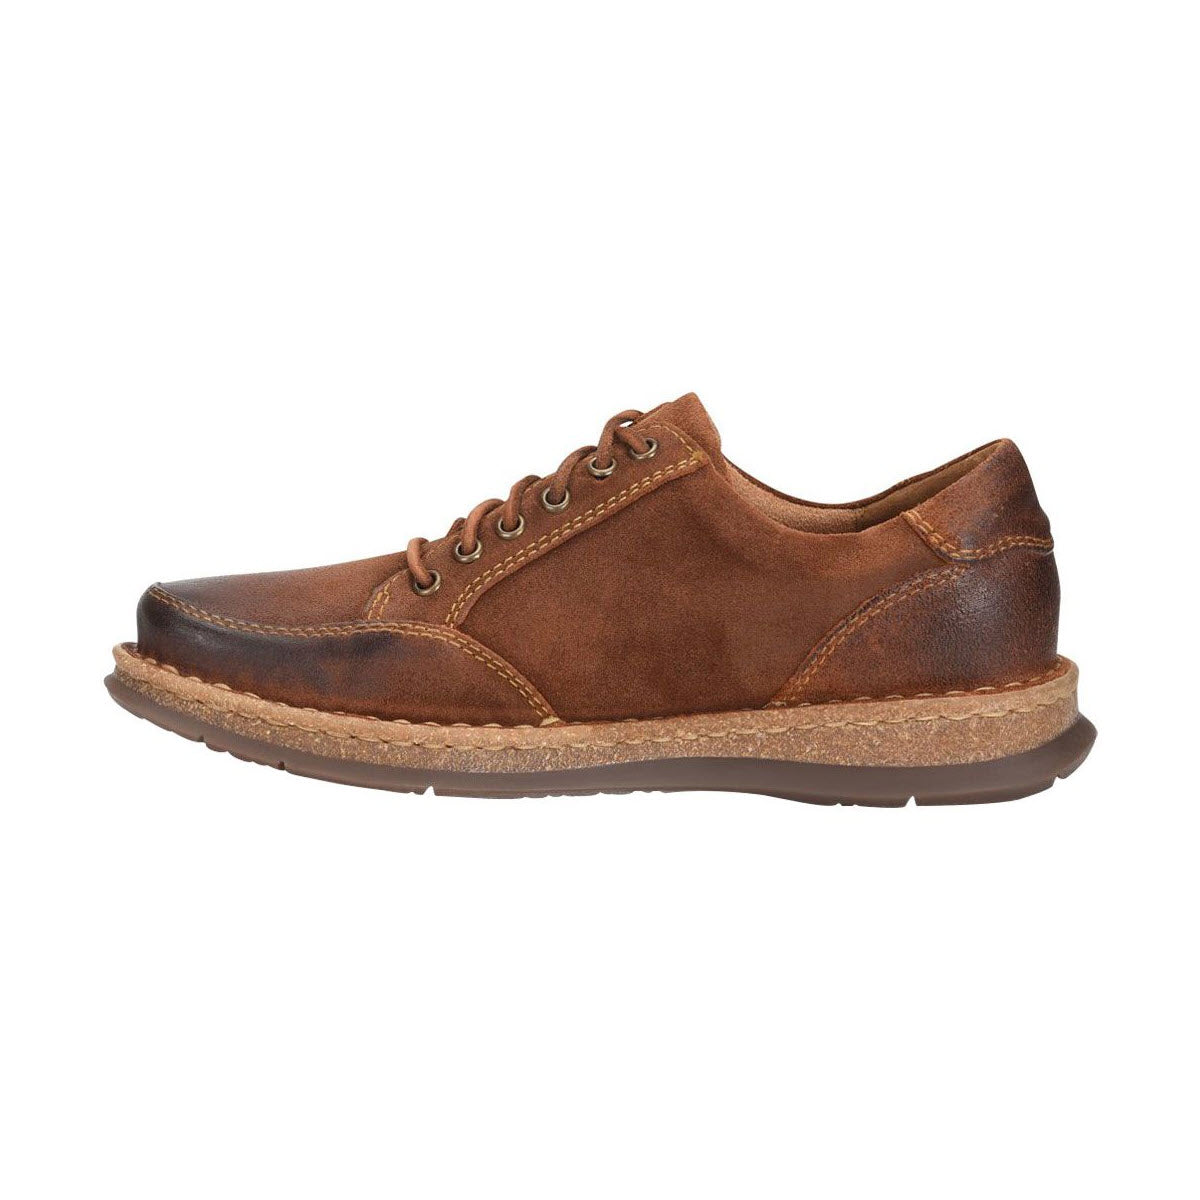 A Born Bronson Lace Oxford Tan Saddle - Mens with a leather upper casual shoe with a lace-up front and a durable rubber outsole, isolated on a white background.